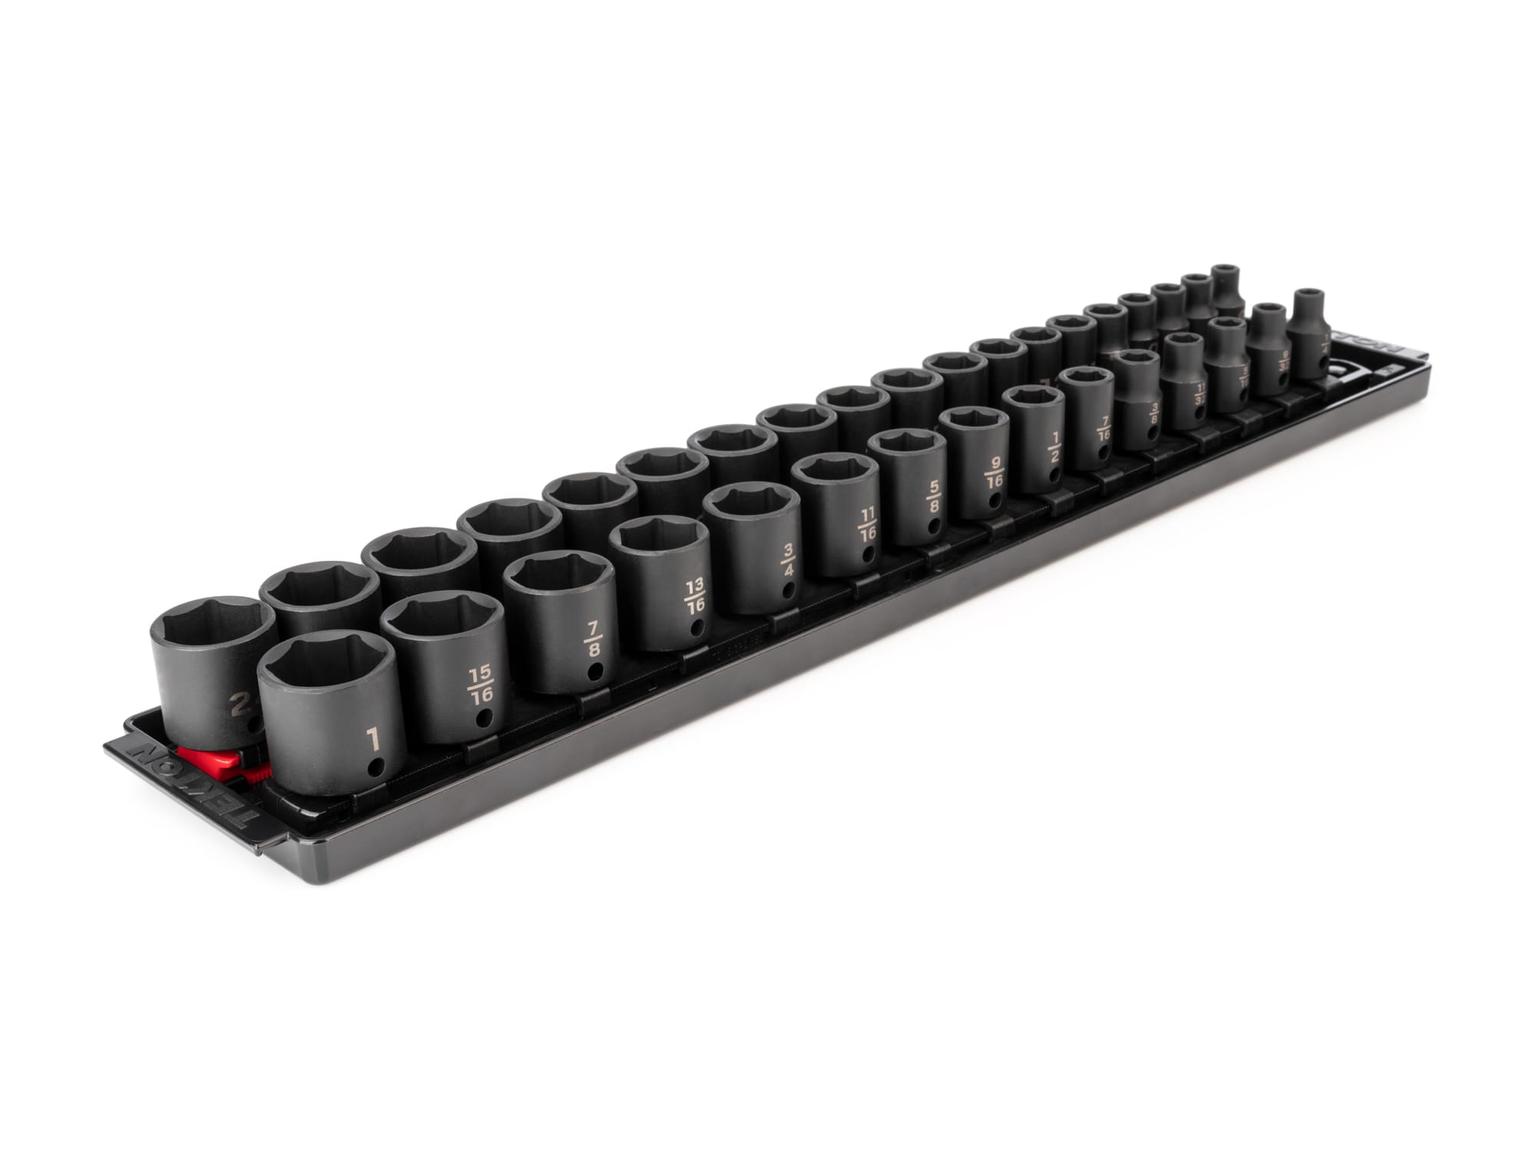 TEKTON SID91202-T 3/8 Inch Drive 6-Point Impact Socket Set, 34-Piece (1/4-1 in, 6-24 mm) with Rails